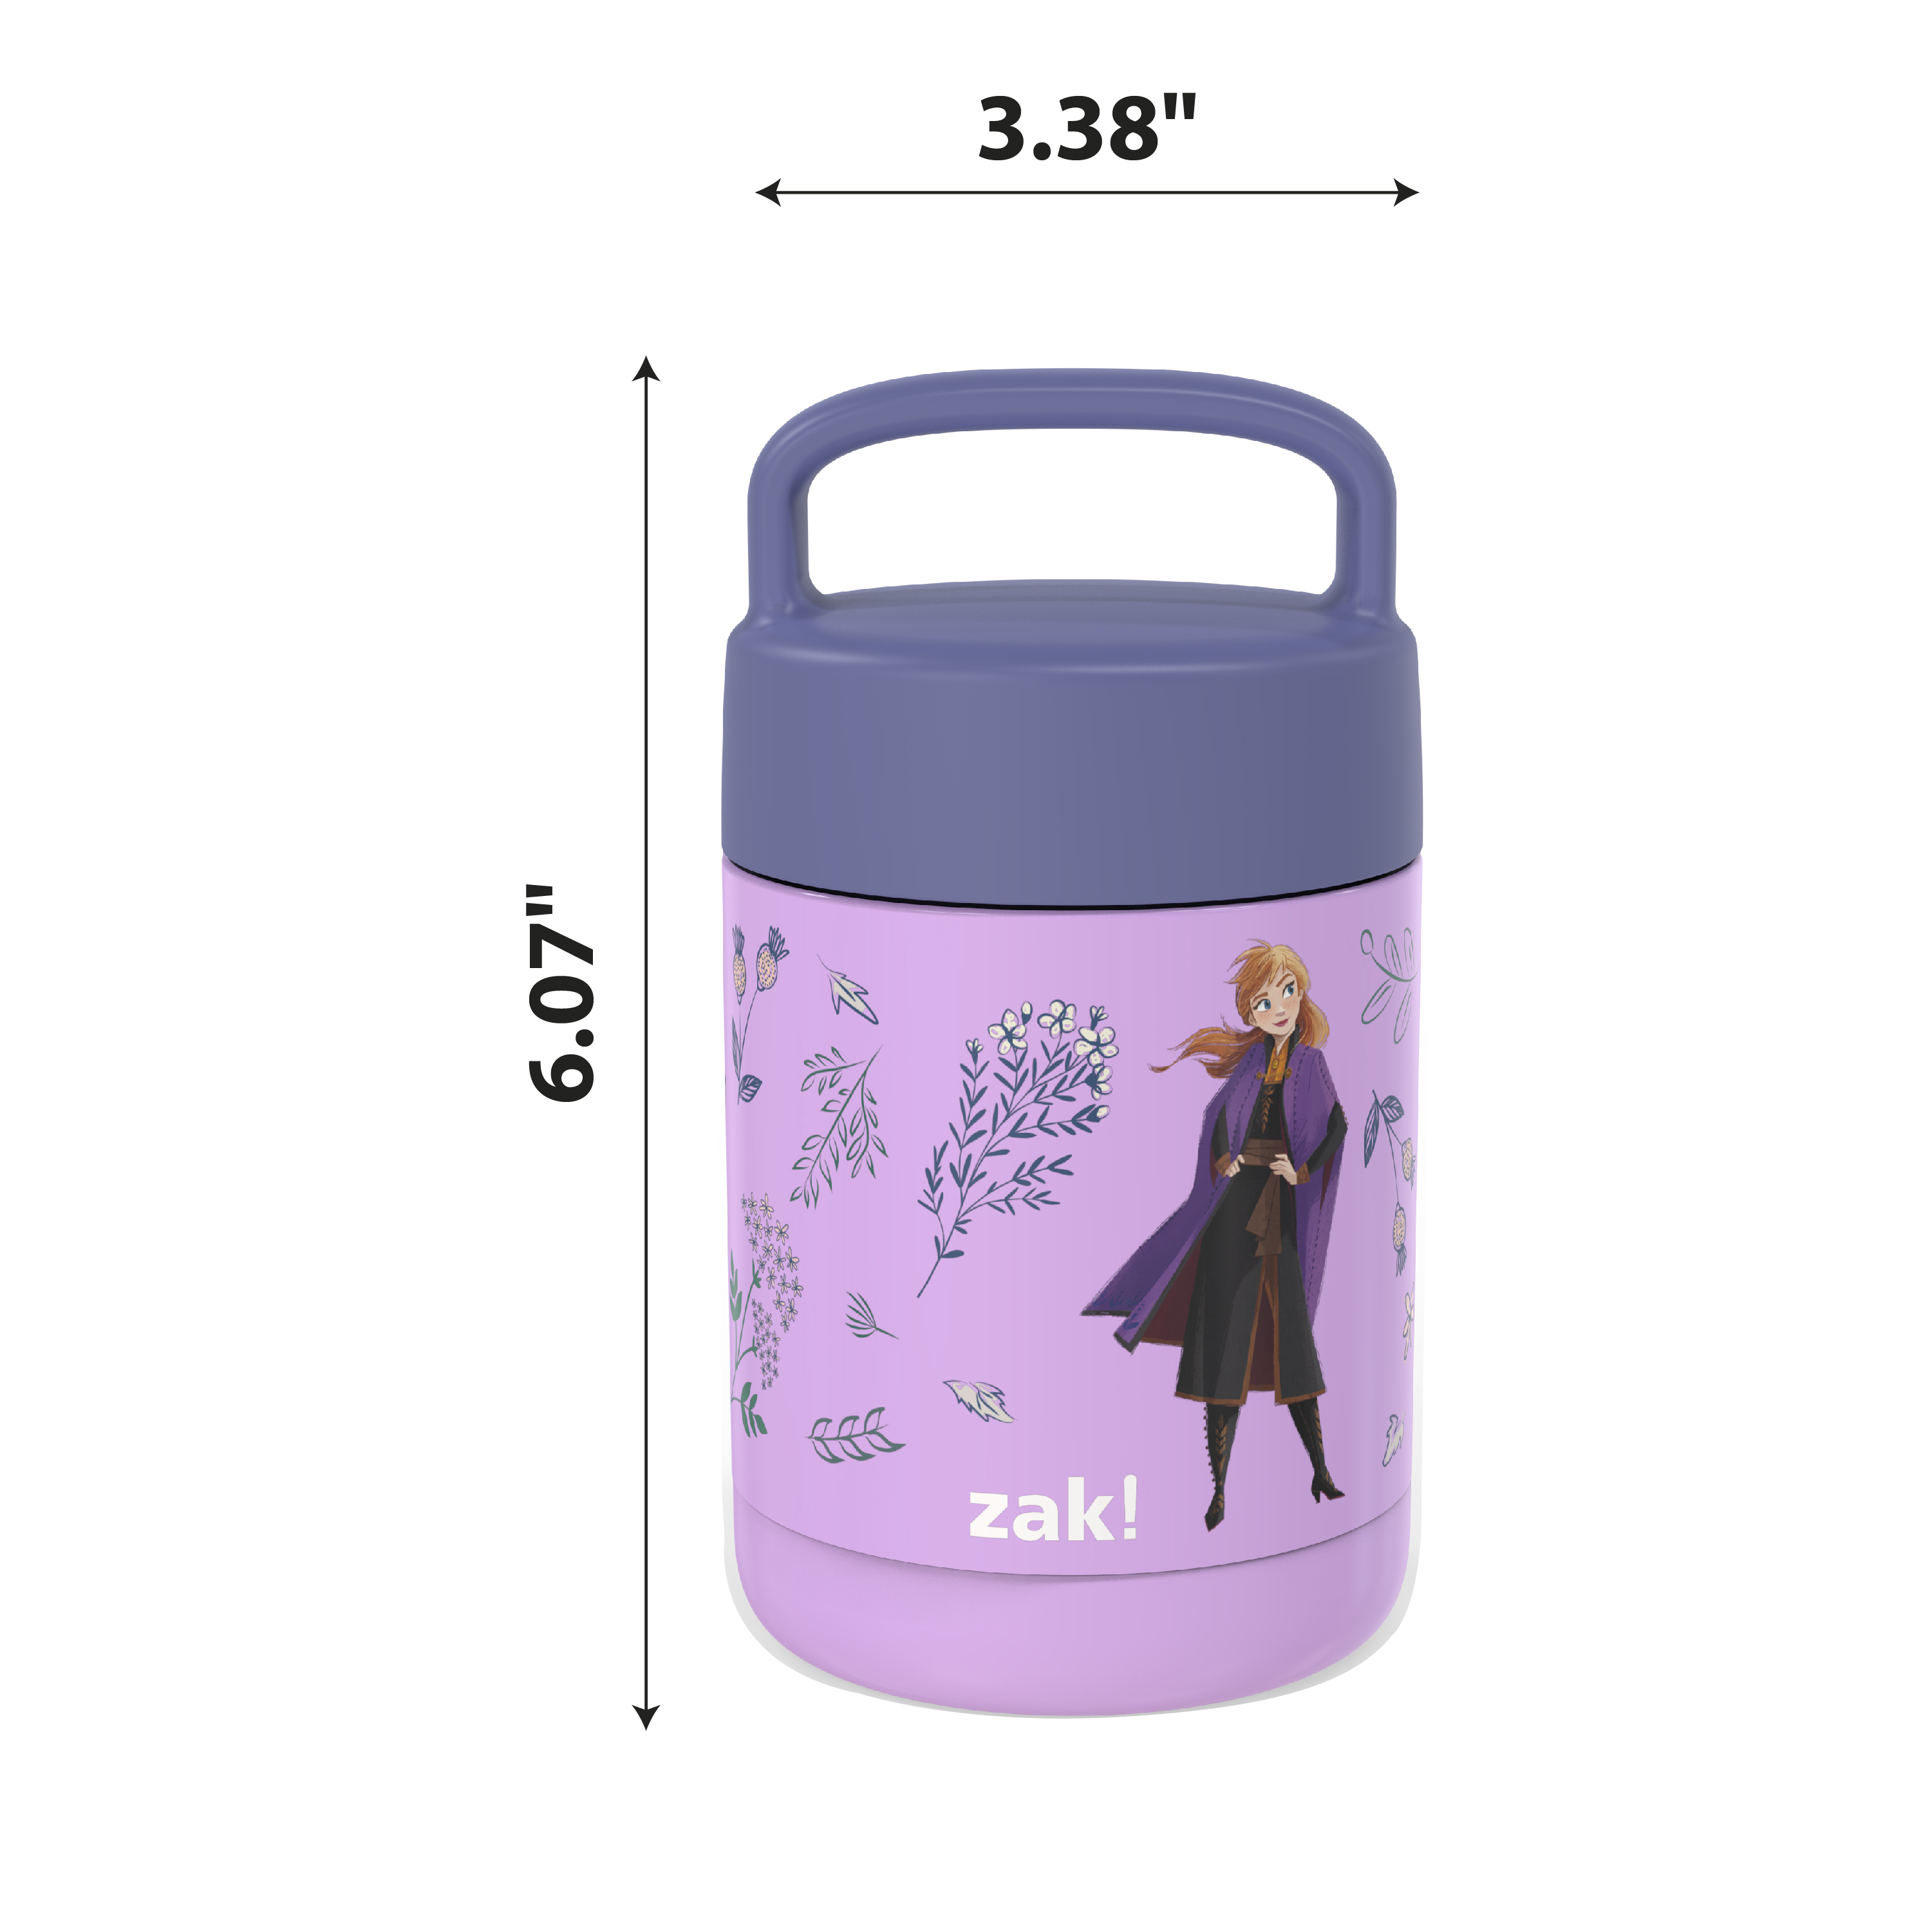 Disney Frozen 2 Movie Reusable Vacuum Insulated Stainless Steel Food Container, Princess Anna slideshow image 10